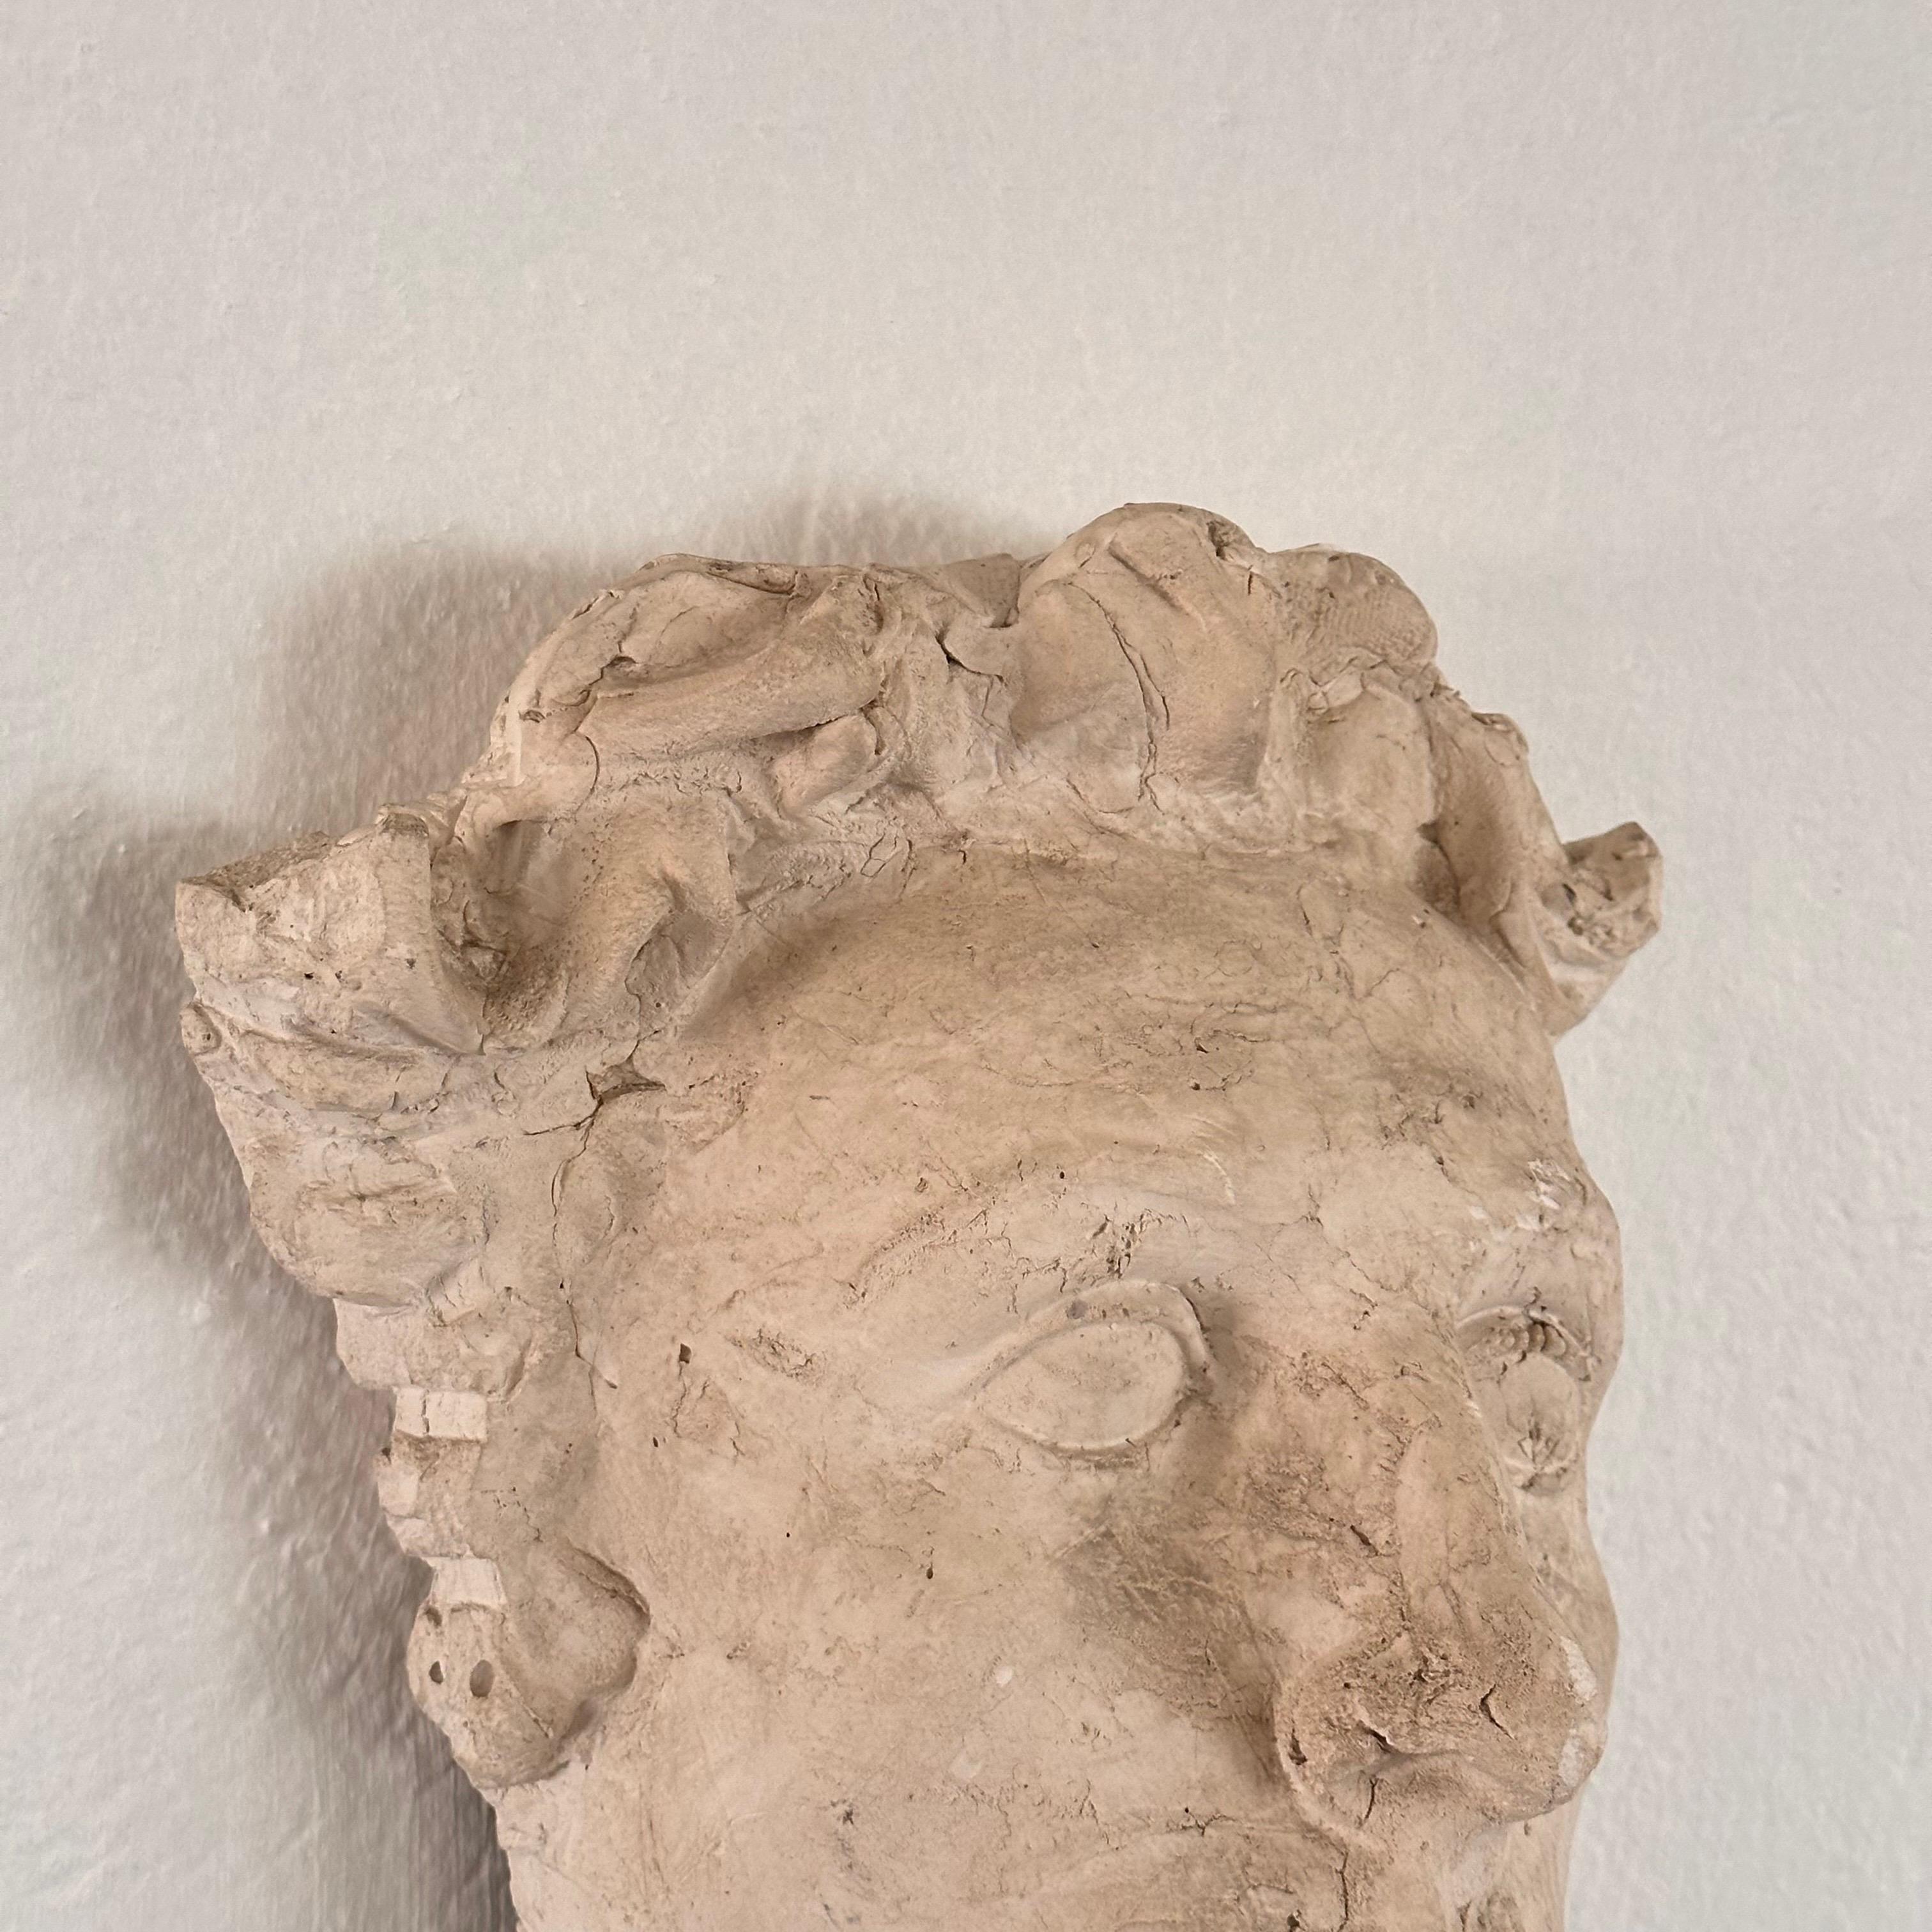 Stunning Decorative Roman Gypsum Face, 1970s Reproduction For Sale 4